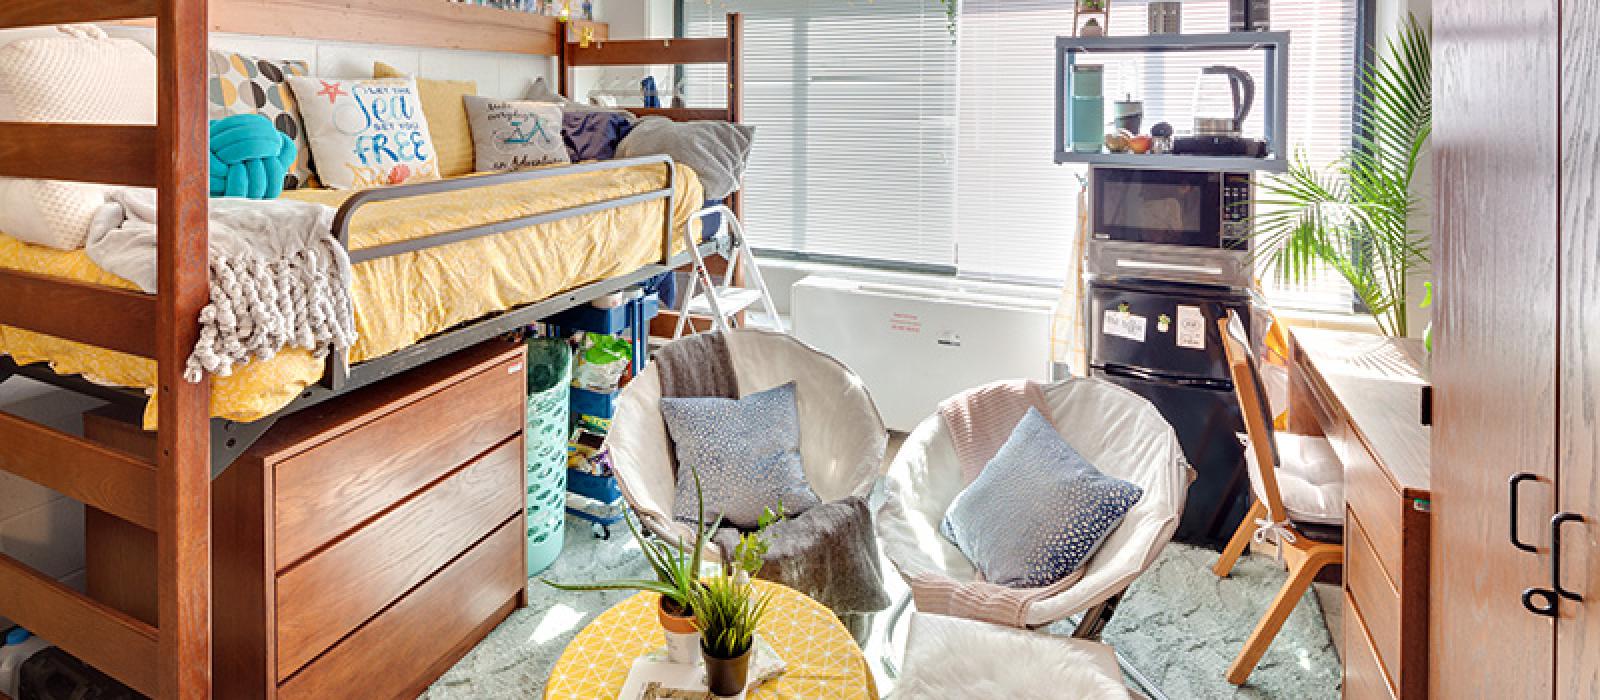 Furnished bedroom with additional student decorations such as chairs, plants and a TV.